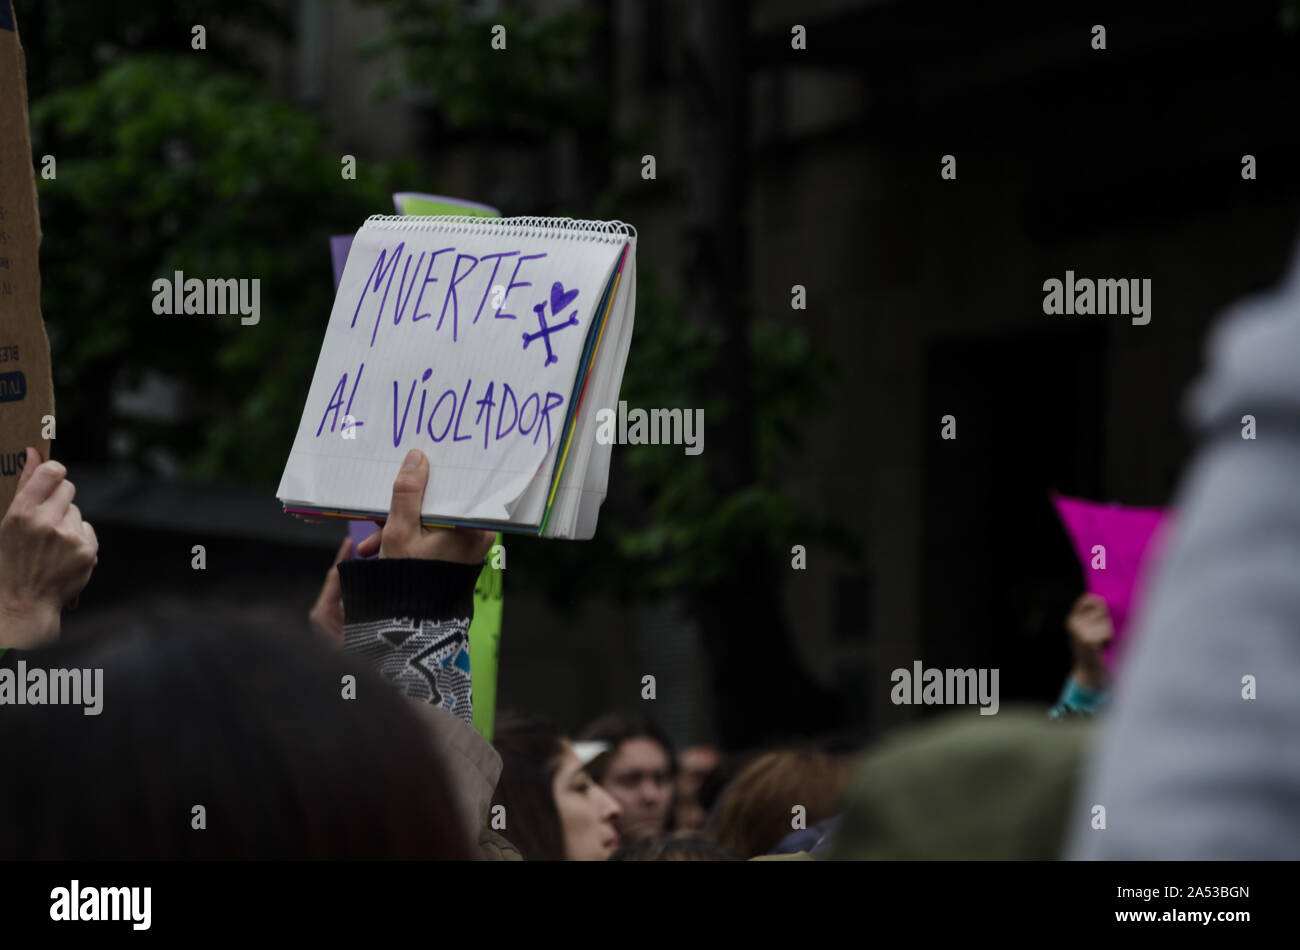 Mar del Plata, Buenos Aires, Argentina. 15-10-2016 Woman's hand in the middle of a demonstration for women's rights, in the street, with a sign with t Stock Photo